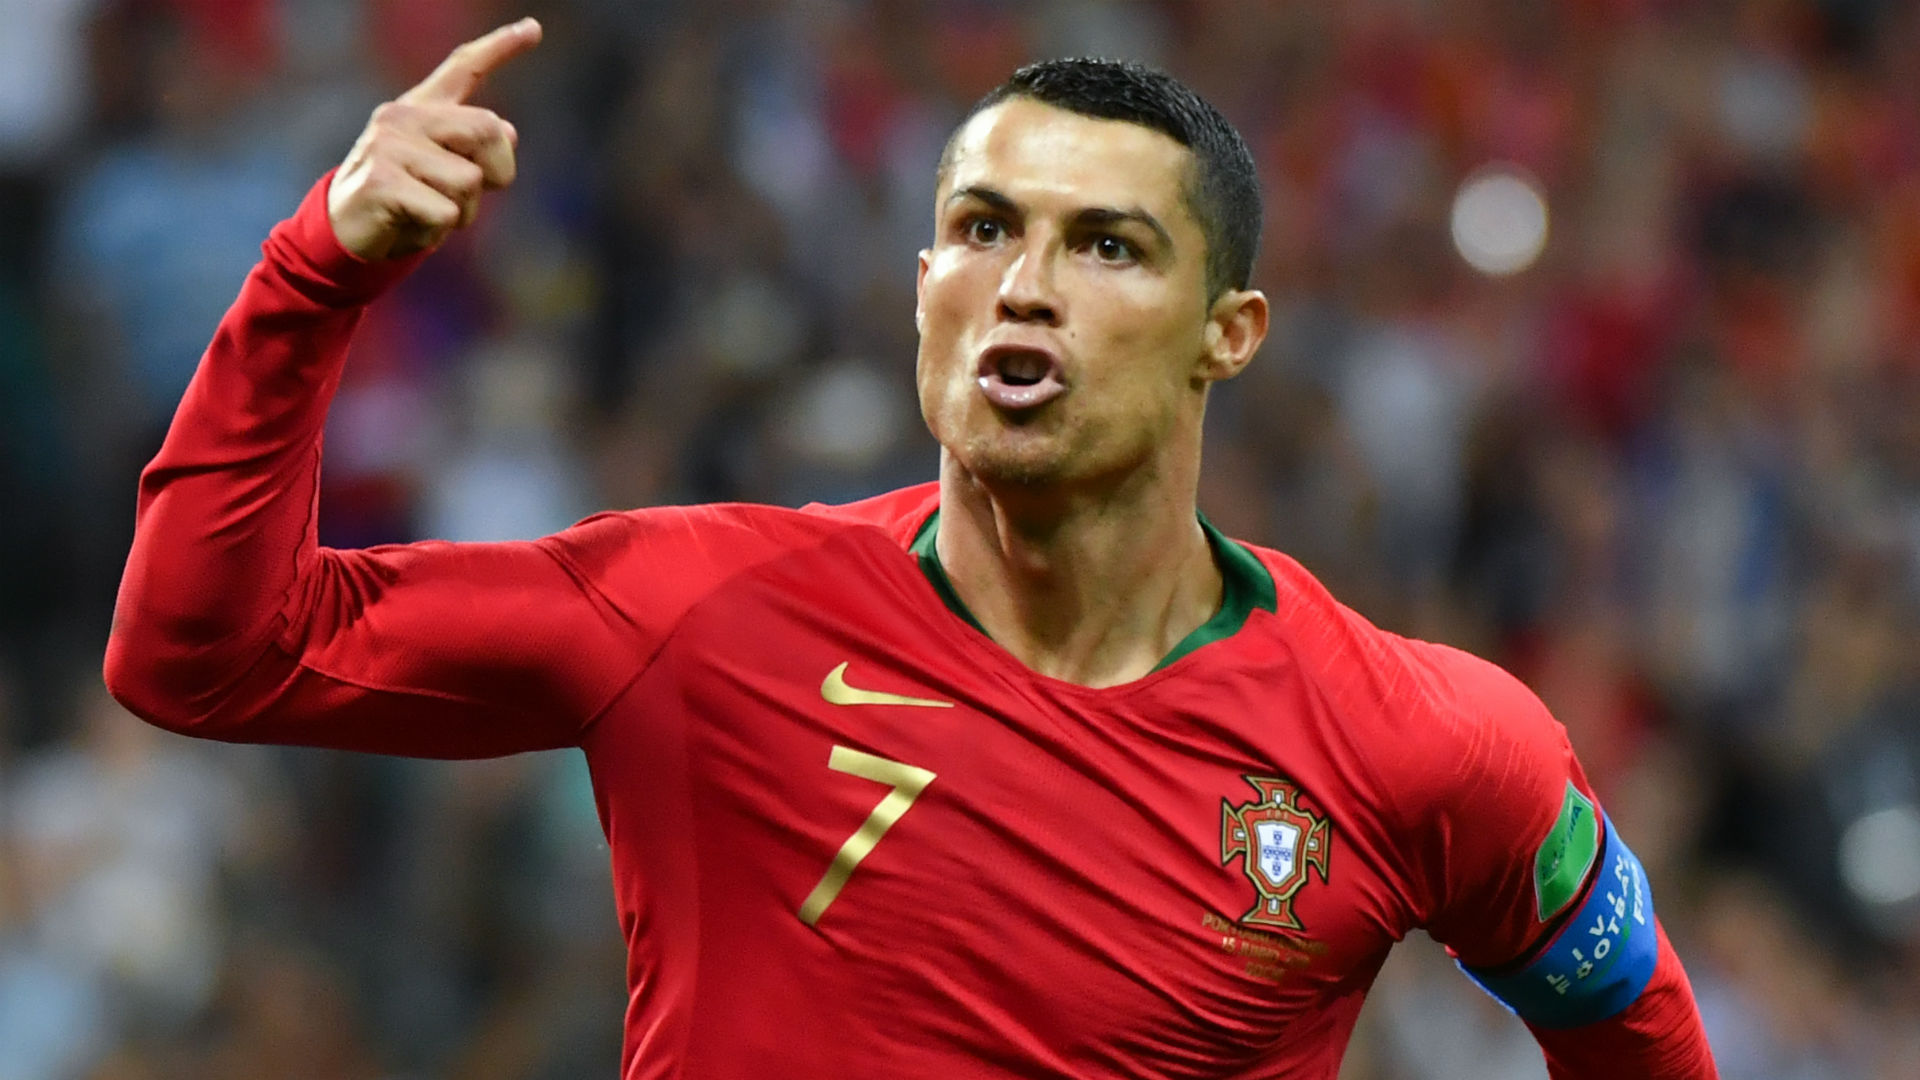 Cristiano Ronaldo set to become international football’s most-capped men’s player